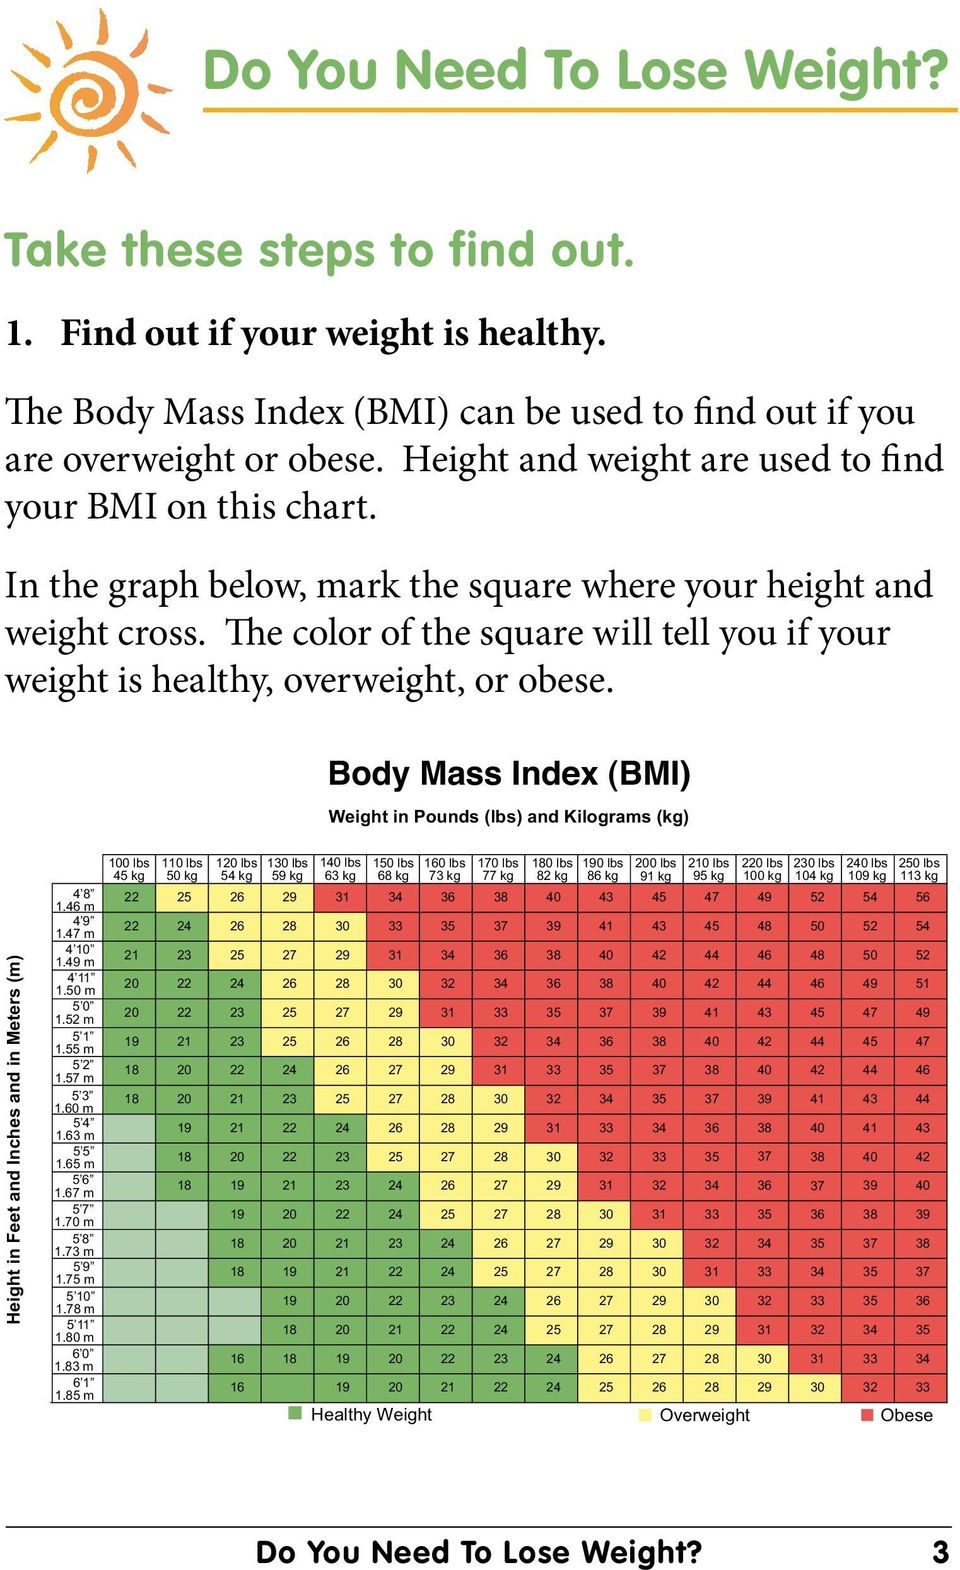 The color of the square will tell you if your weight is healthy, overweight, or obese.